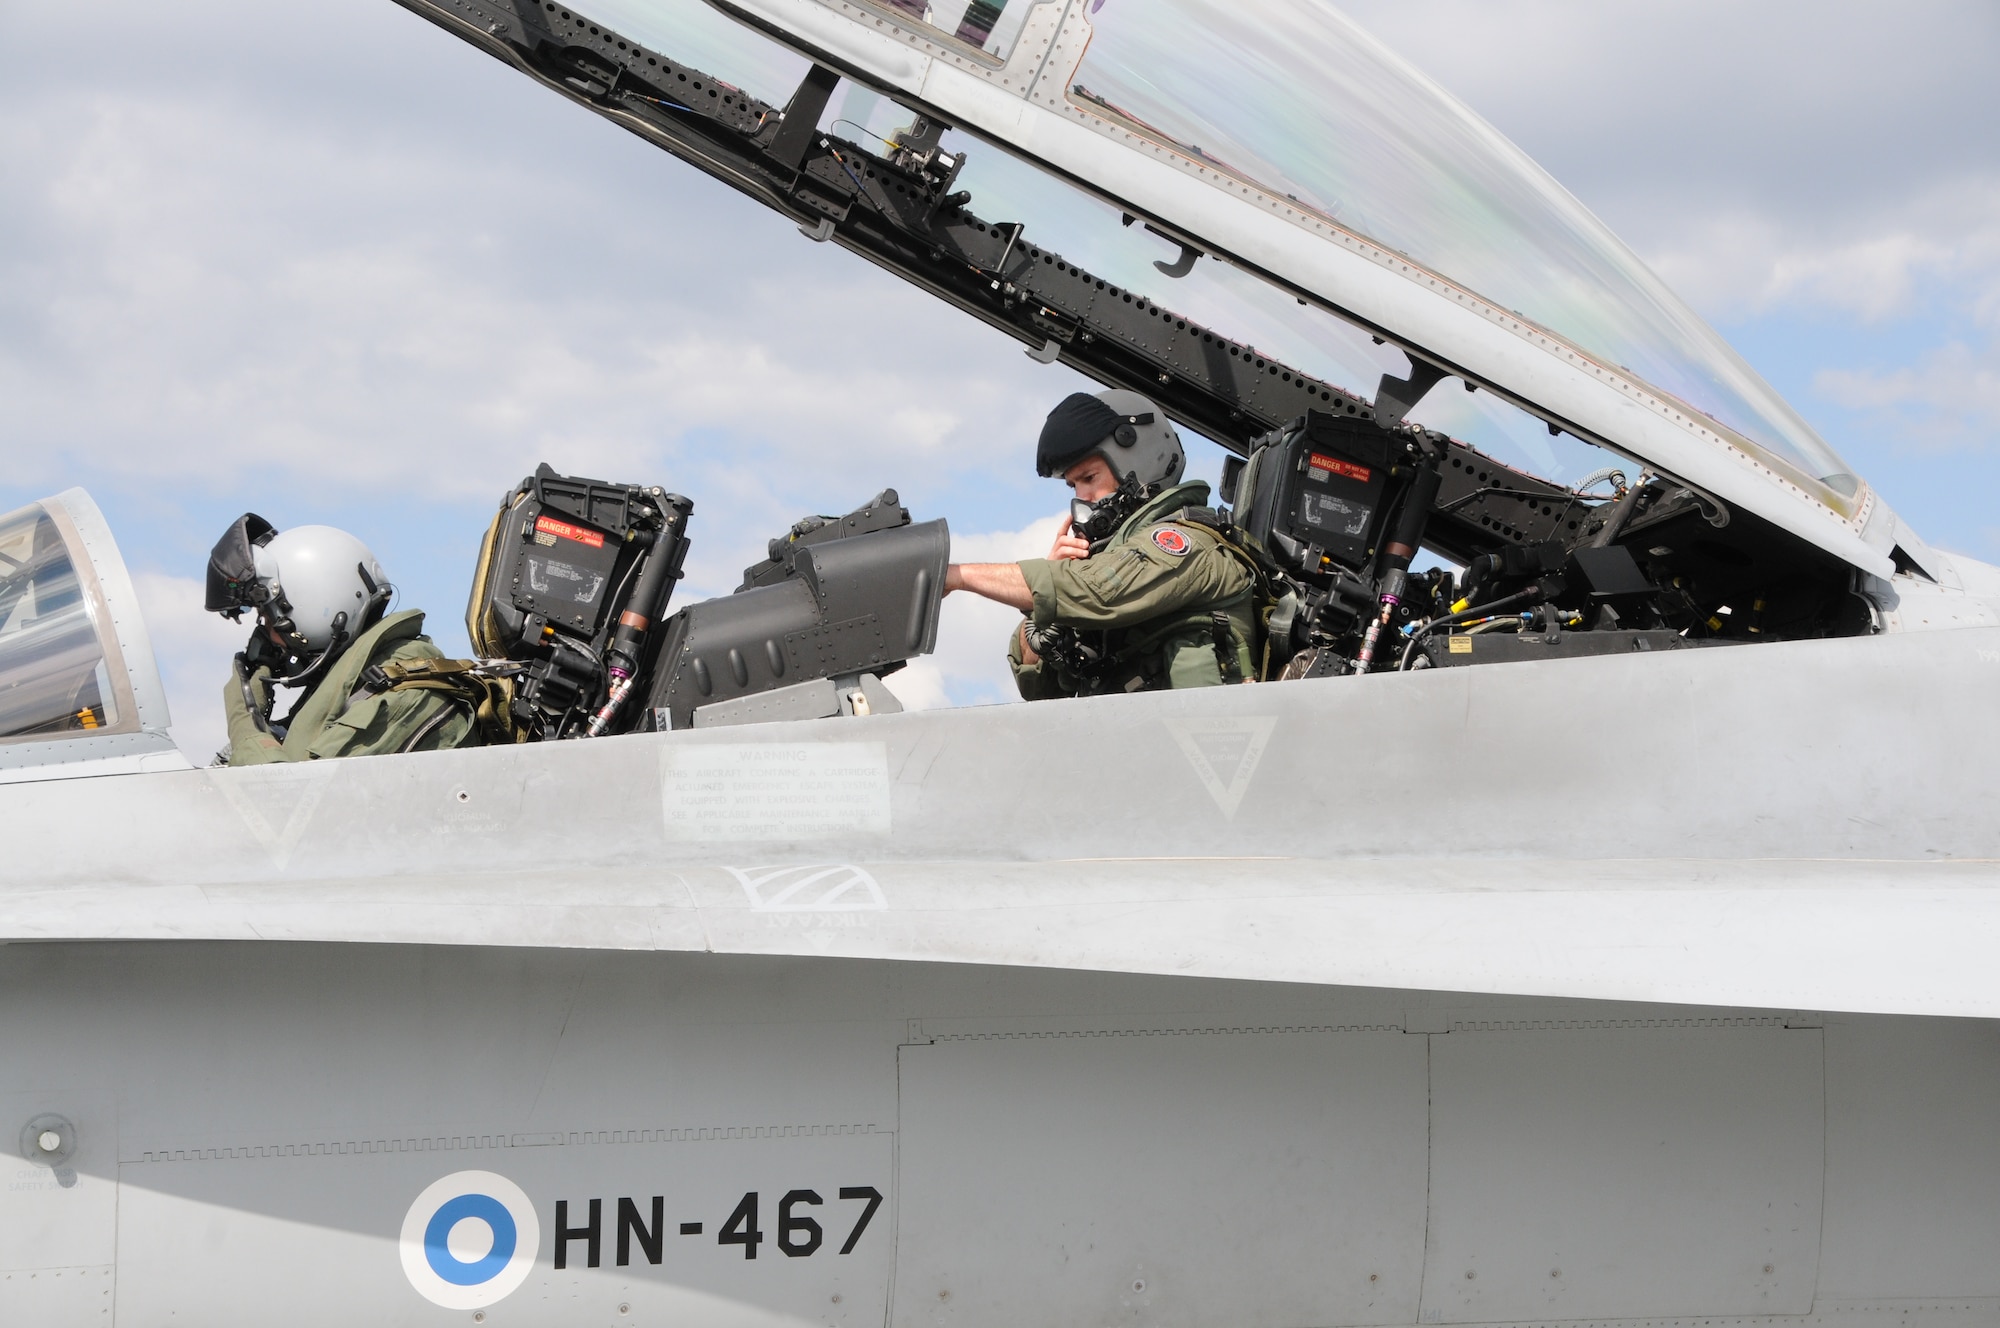 U.S. Air Force Maj. Kevin Welch, an F-15C instructor pilot from 173rd Fighter Wing, prepares to fly in the back seat of a Finnish F-18 Hornet, May 16, 2016, during a joint training exercise between the Finnish air force and the Oregon Air National Guard's 173rd Fighter Wing. The exercise fell under Operation Atlantic Resolve but differed from a normal theater security package because it was purely a training opportunity with a partner country.  (U.S. Air National Guard photo by Tech. Sgt. Jefferson Thompson/released)